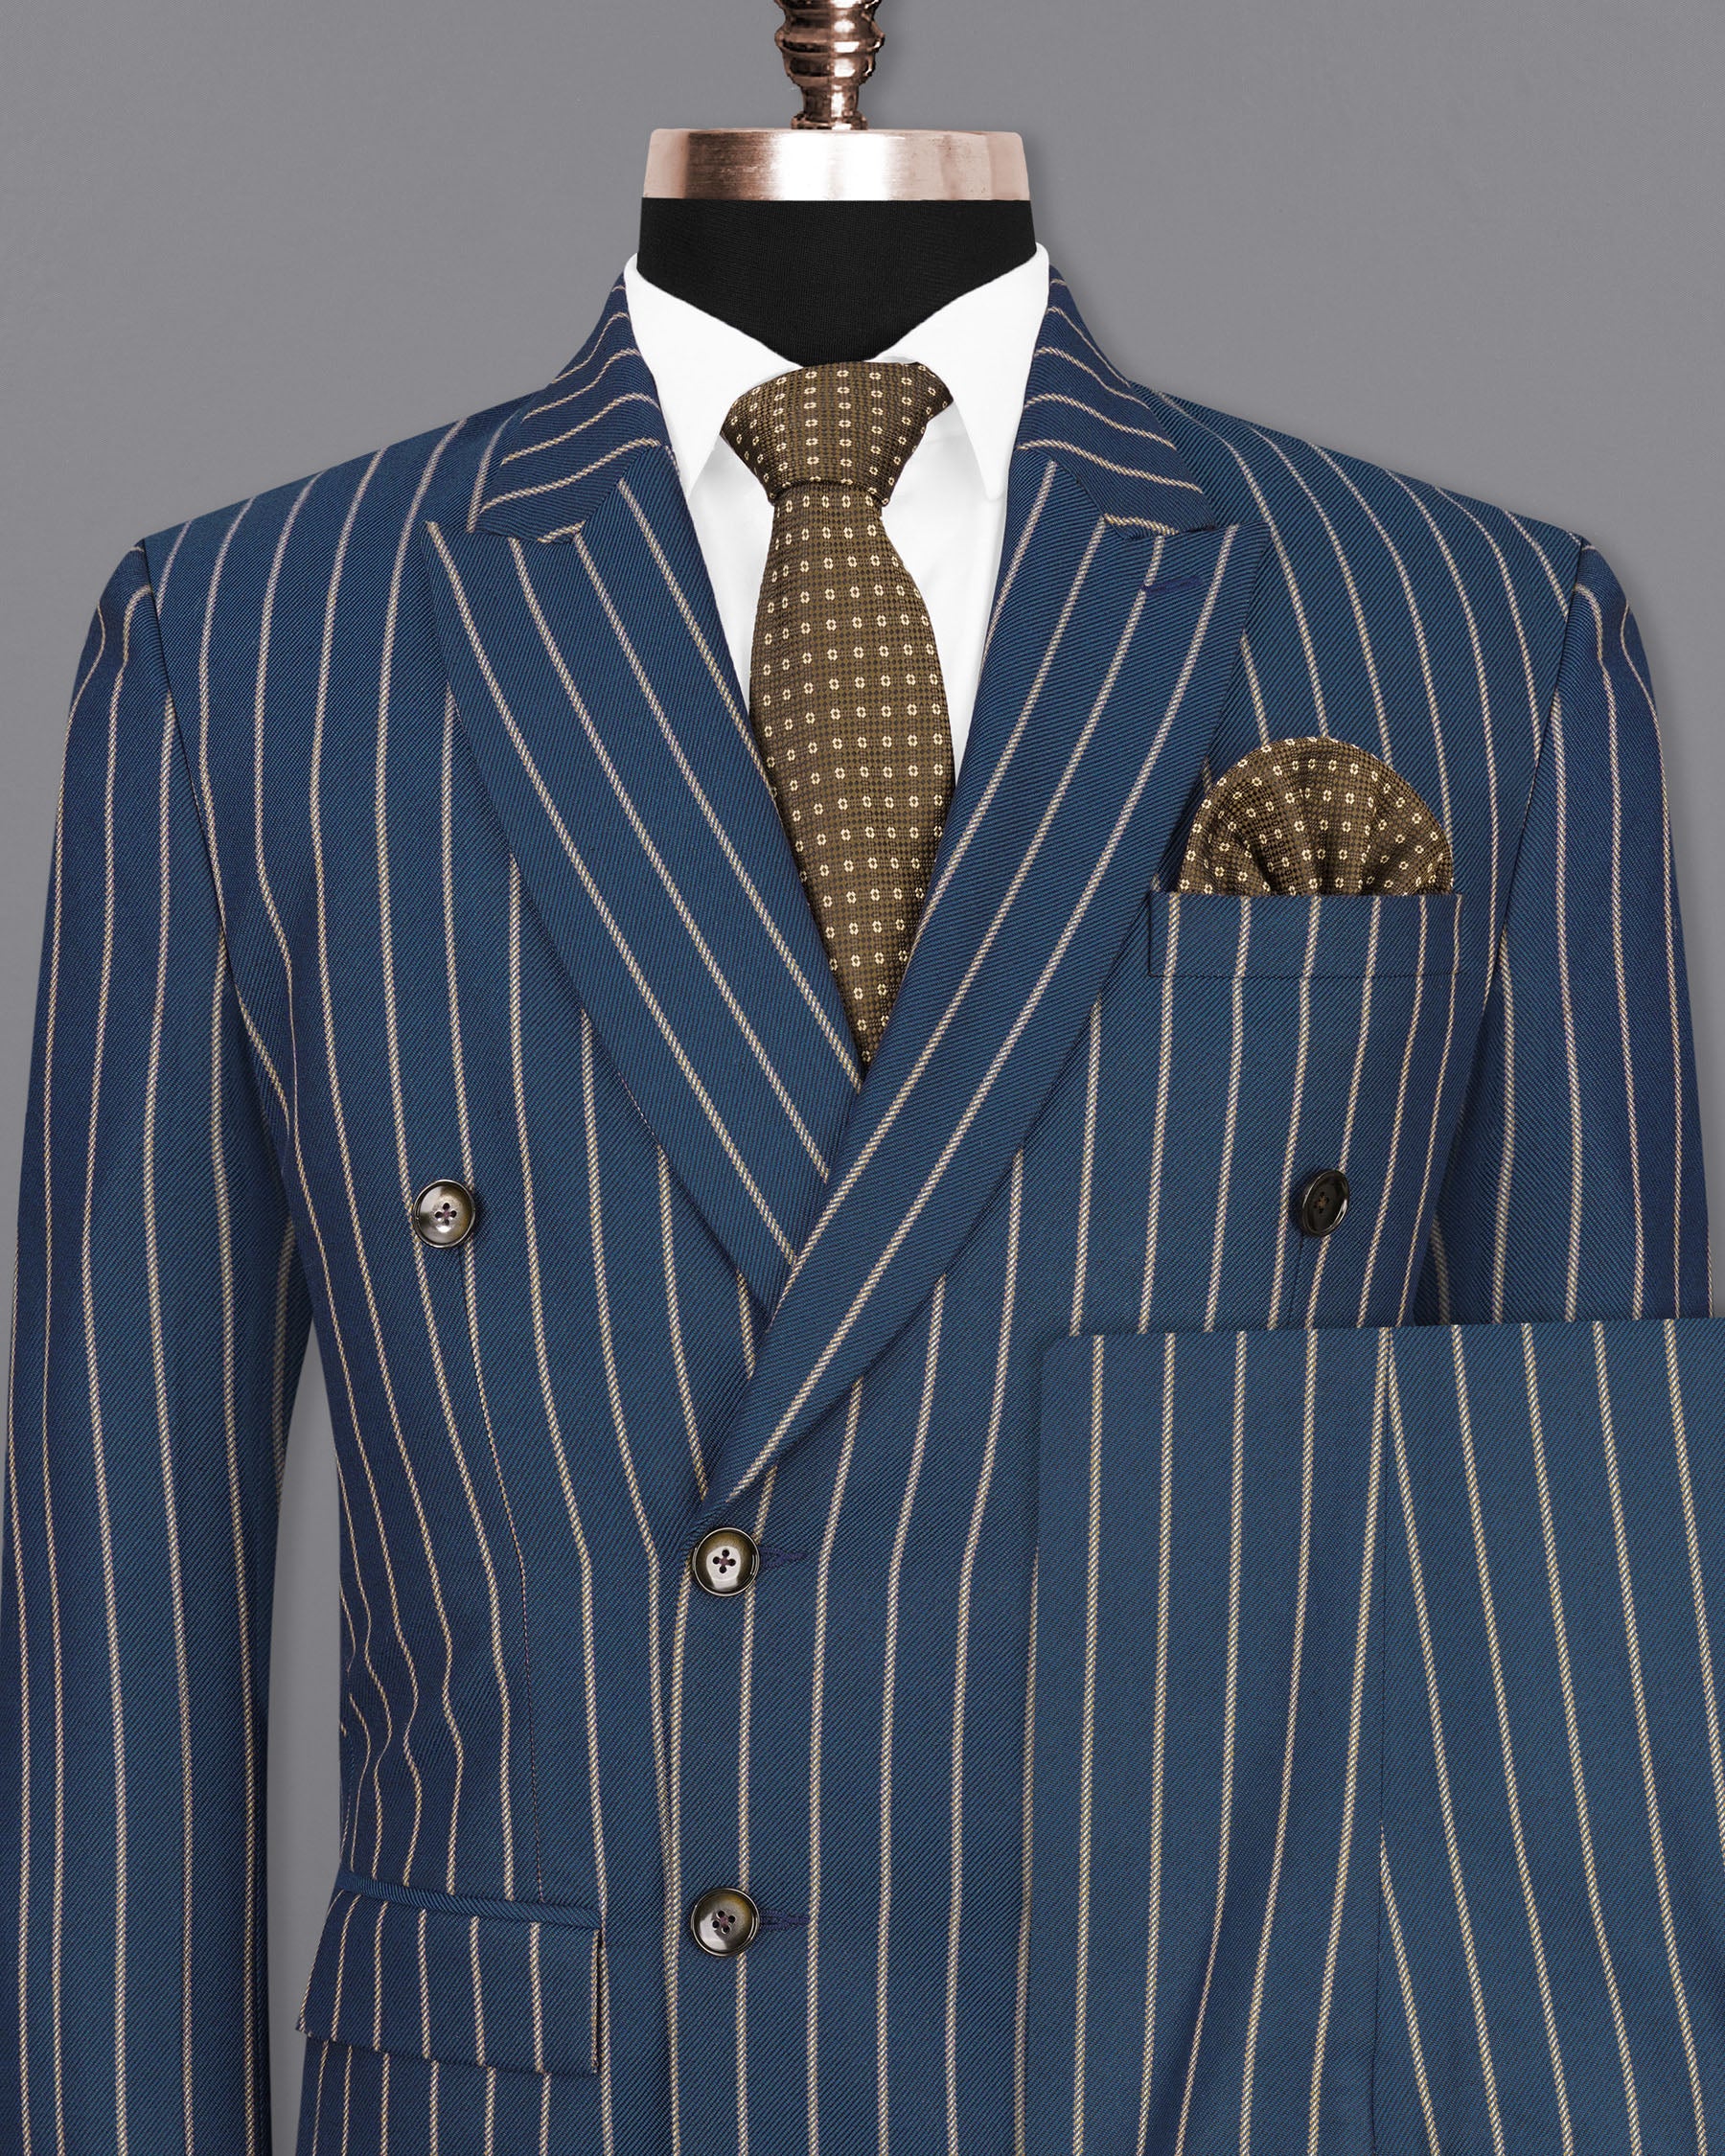 Blue striped suit, Double Breasted, Jacket and Pants - C4014